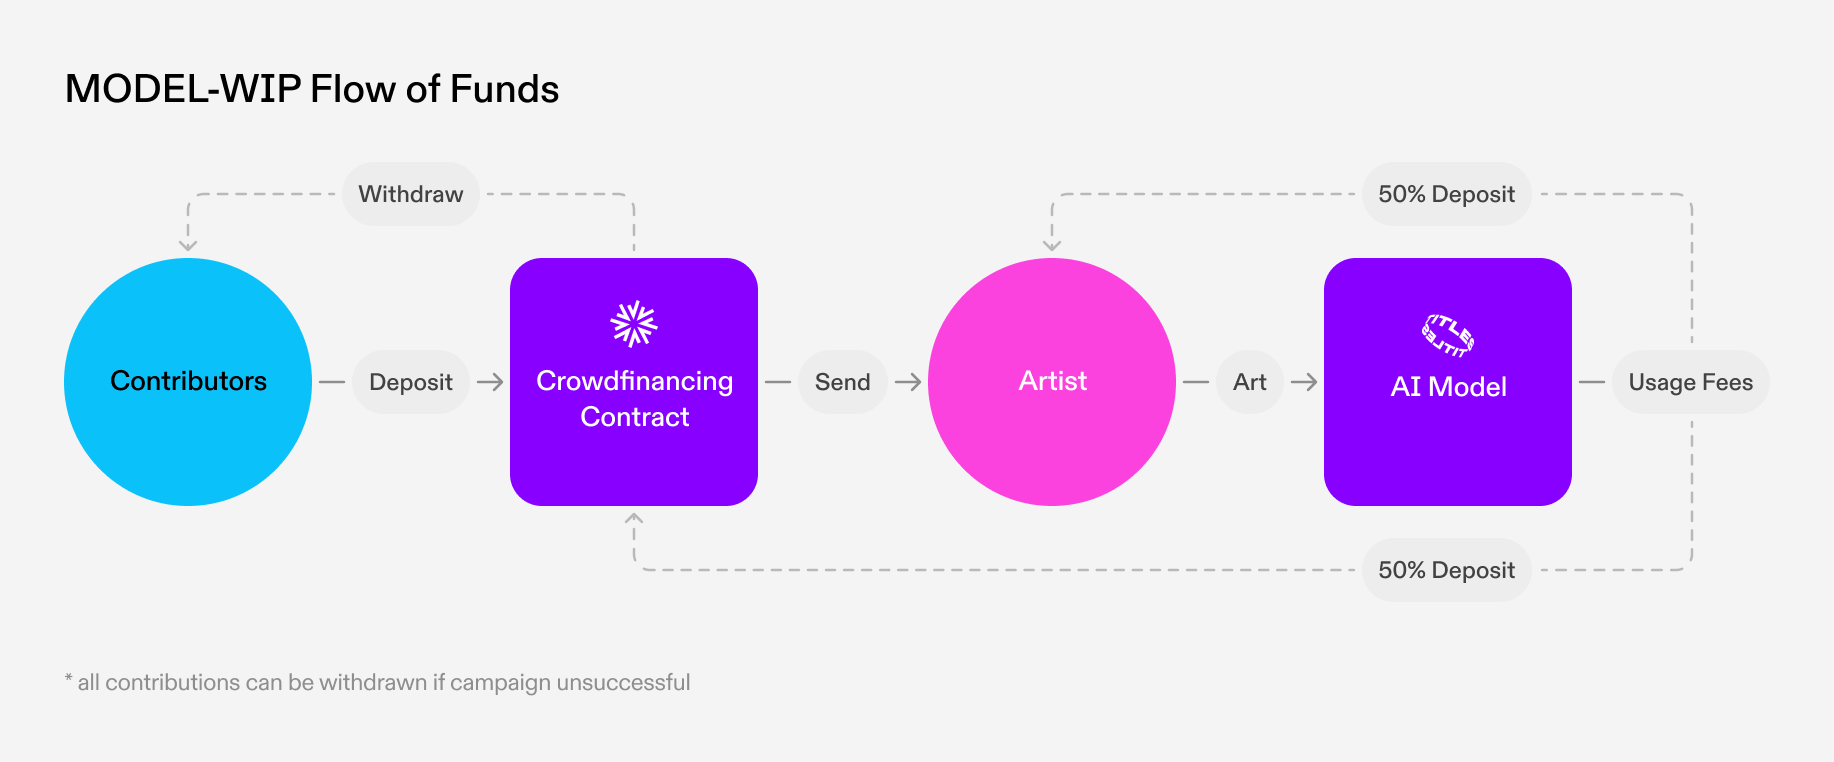 How the flows of funds works